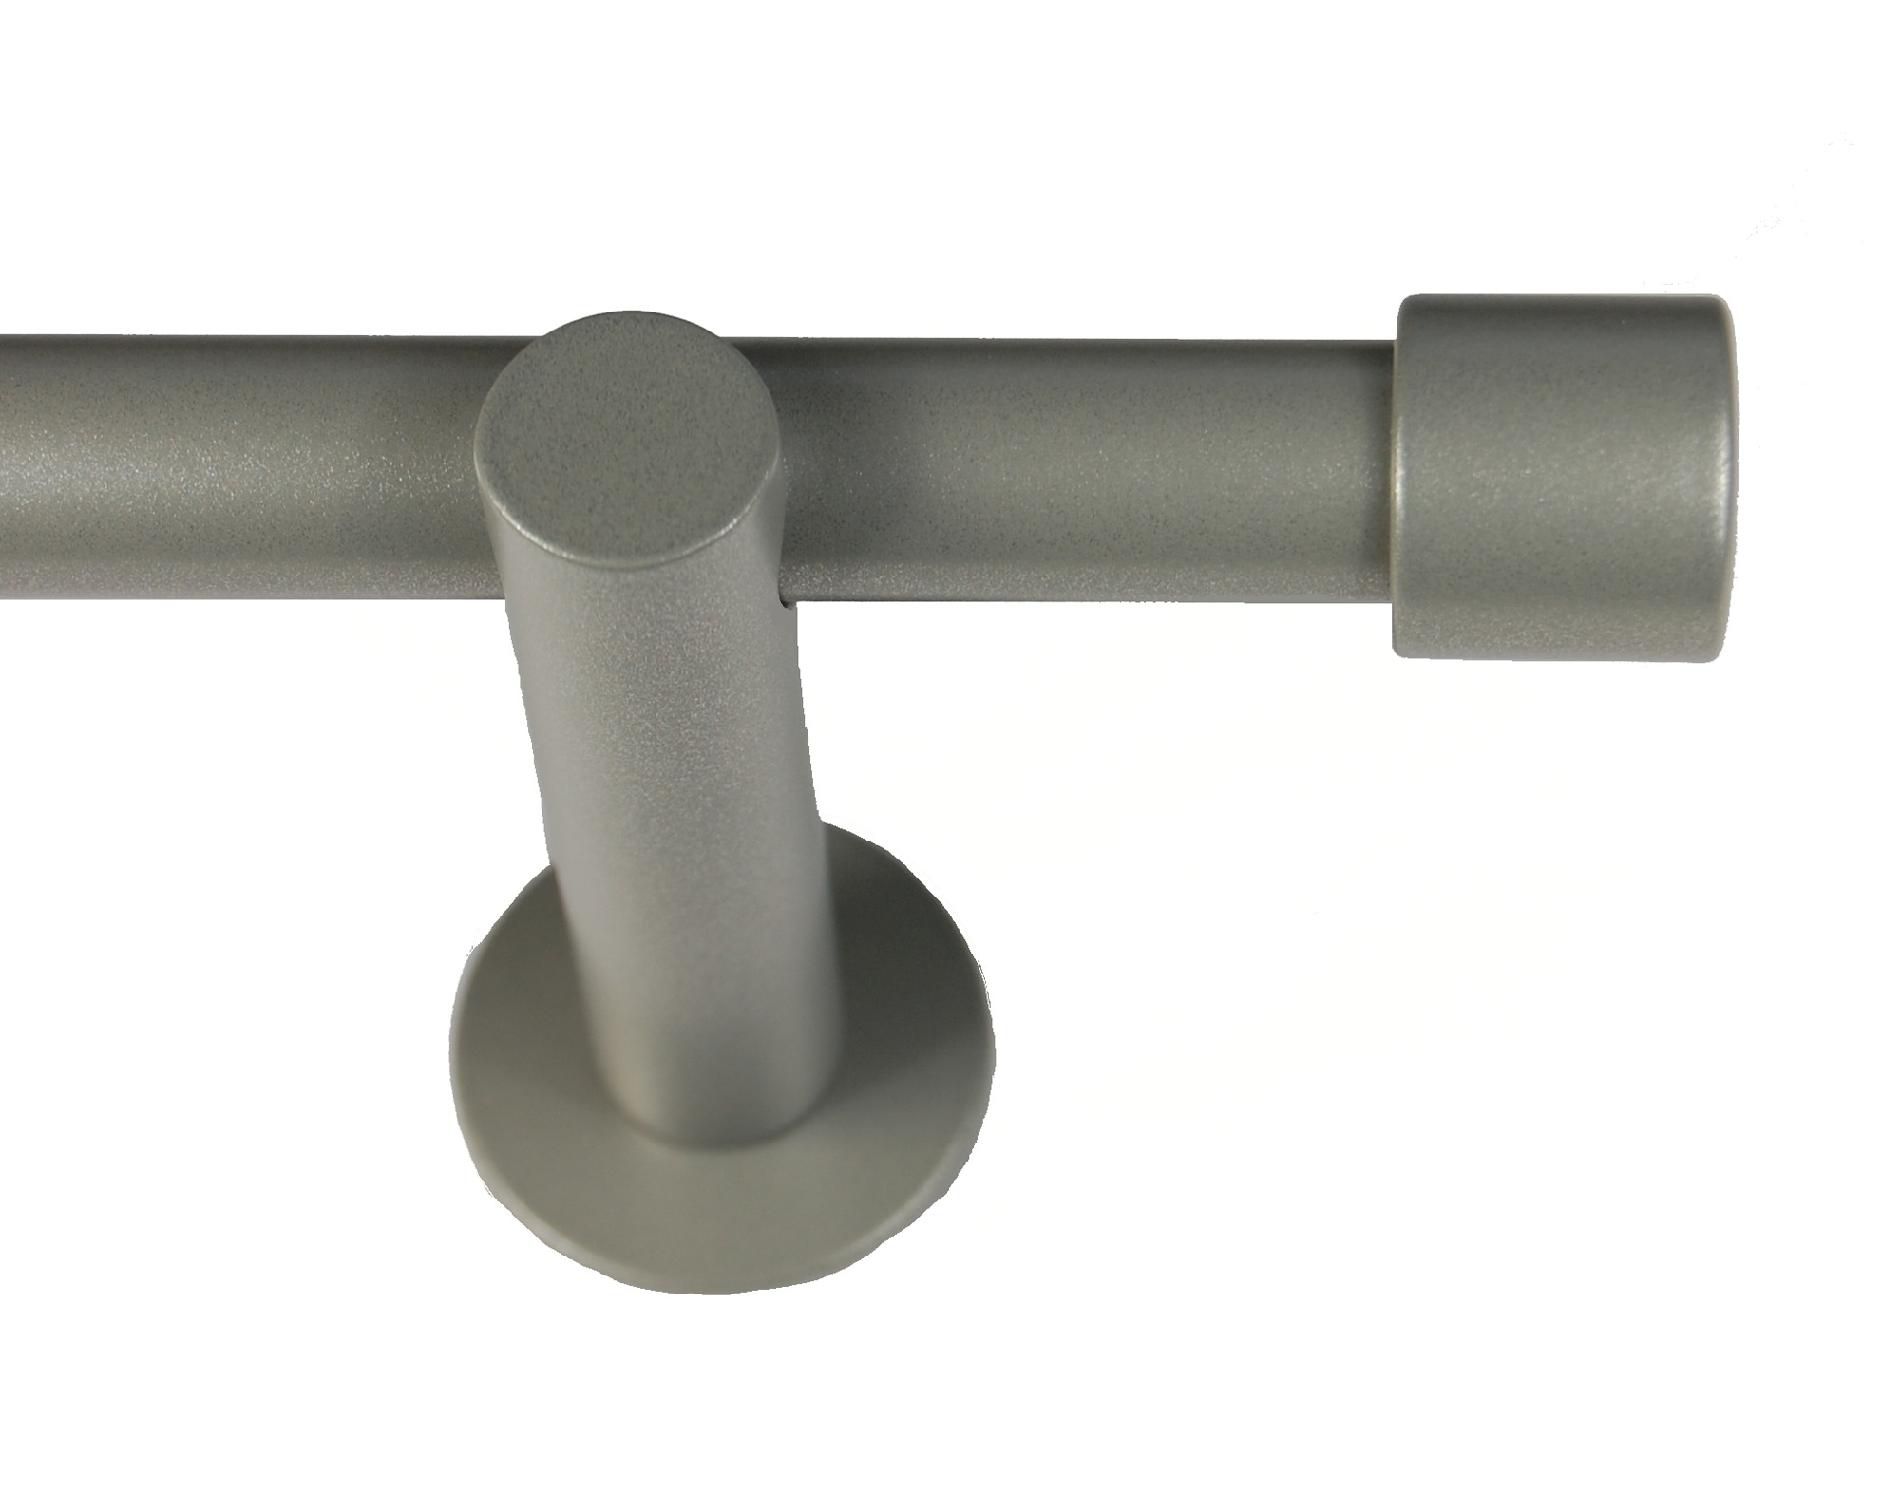 BCL Verona Curtain Rod, Pewter Finish, 48-inch to 86-inch, 5/8" Diameter Pole